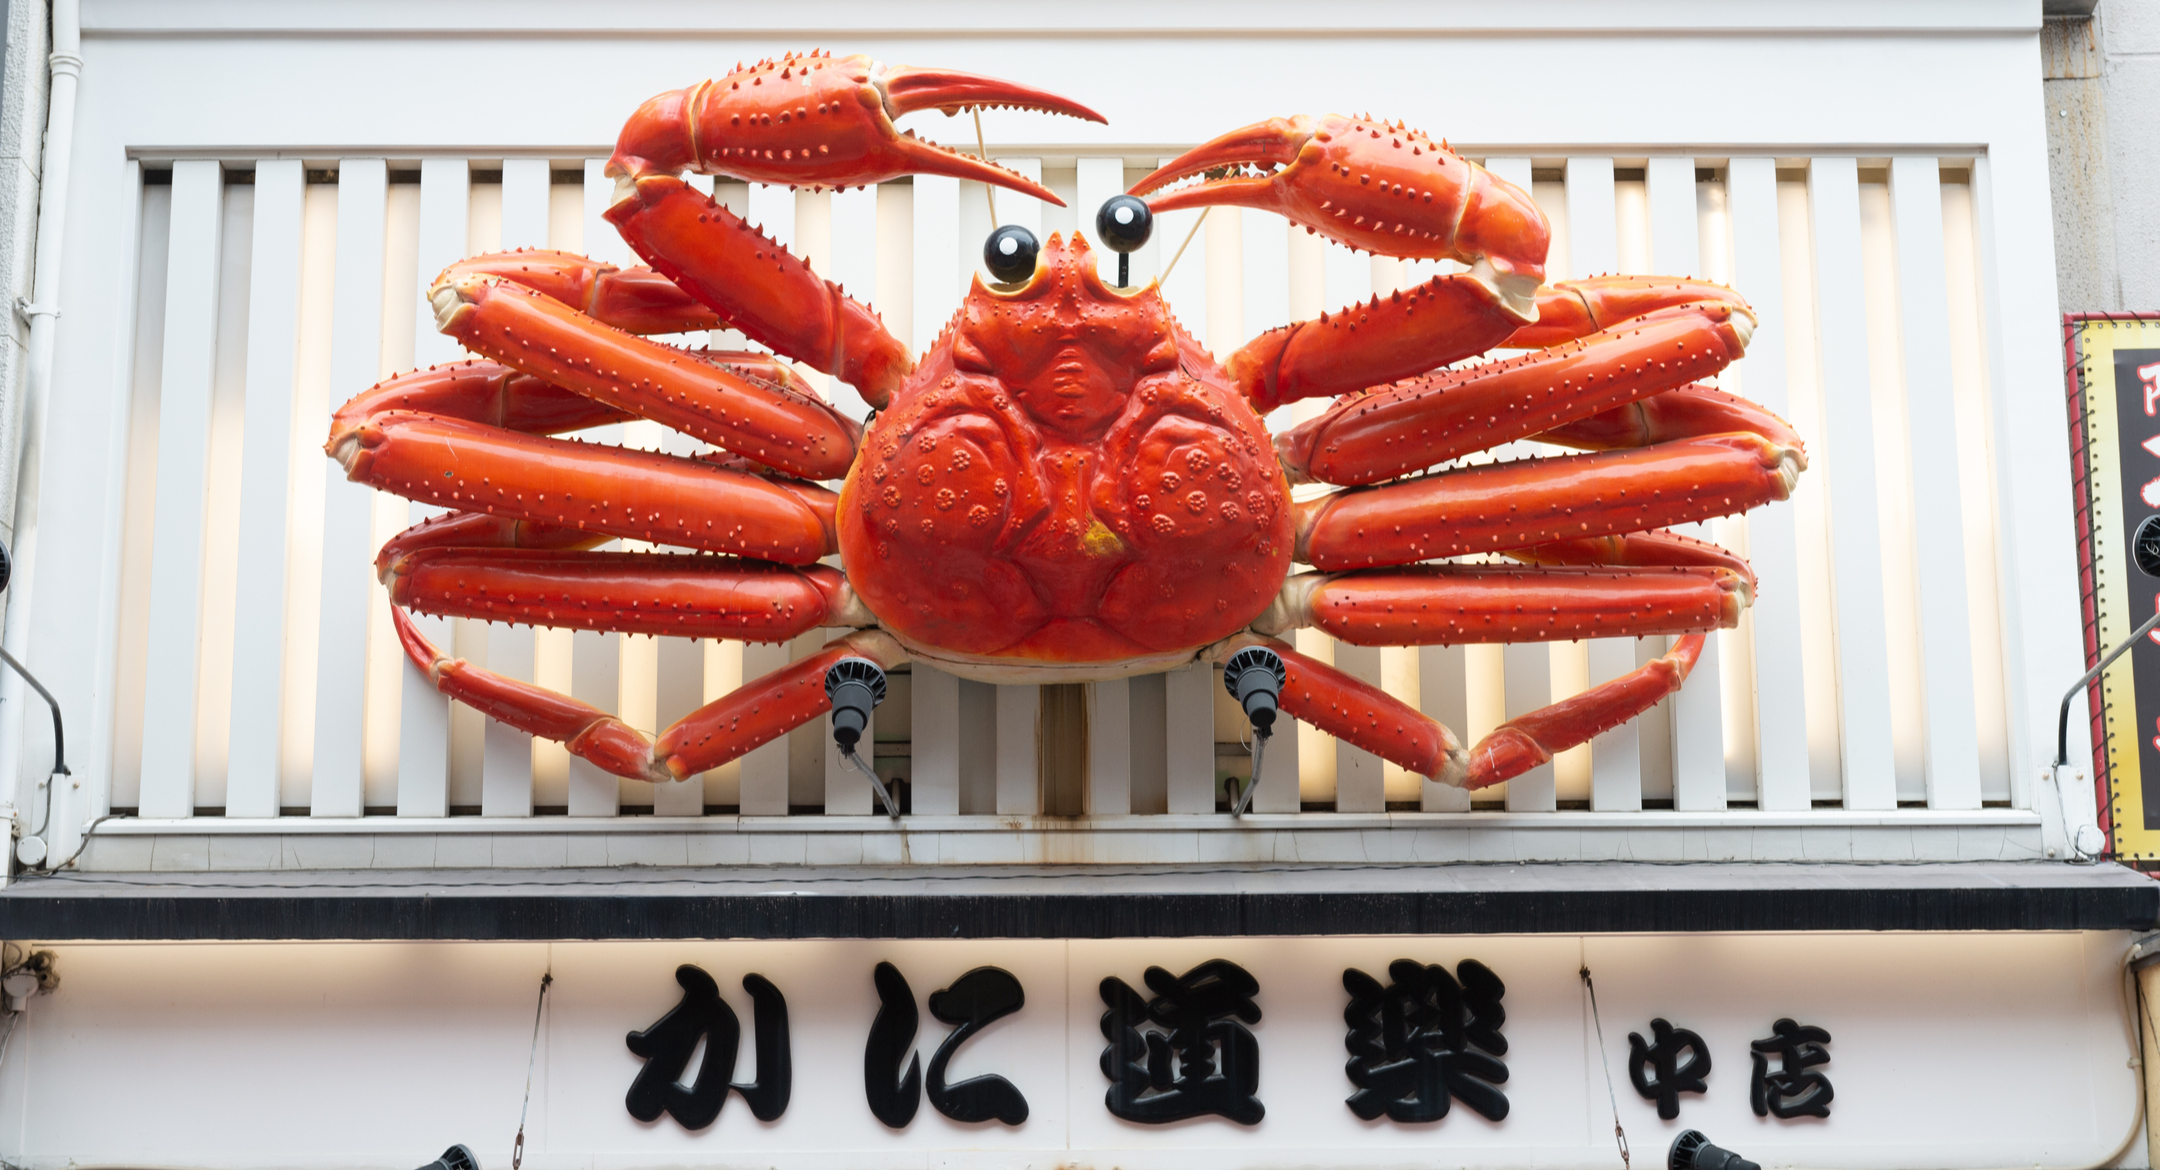  A giant snow crab above the entrance of a restaurant in Japan.  Credit: robbin lee/Shutterstock.com